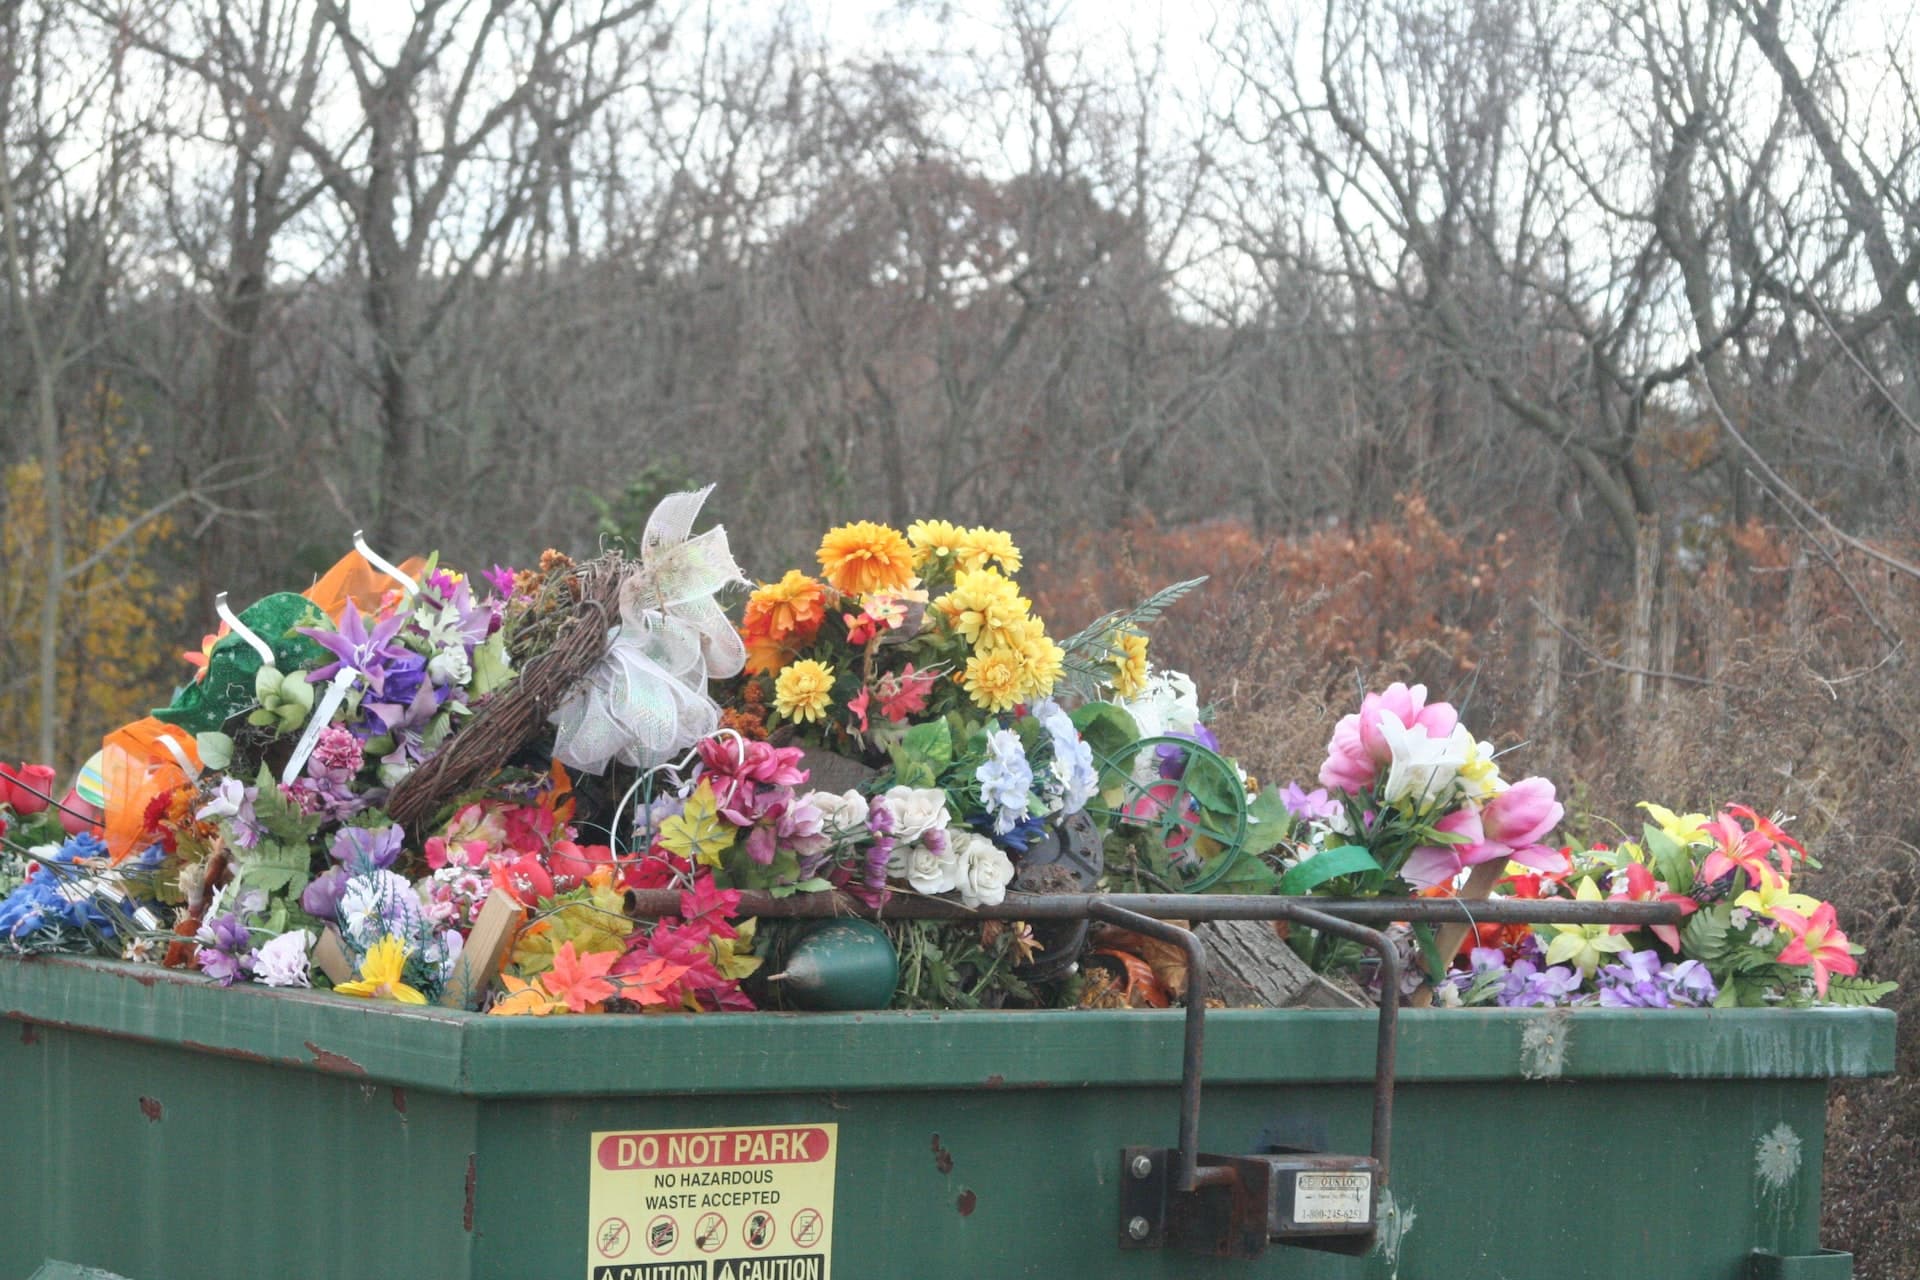 7 Things You Cannot Put in a Rental Dumpster